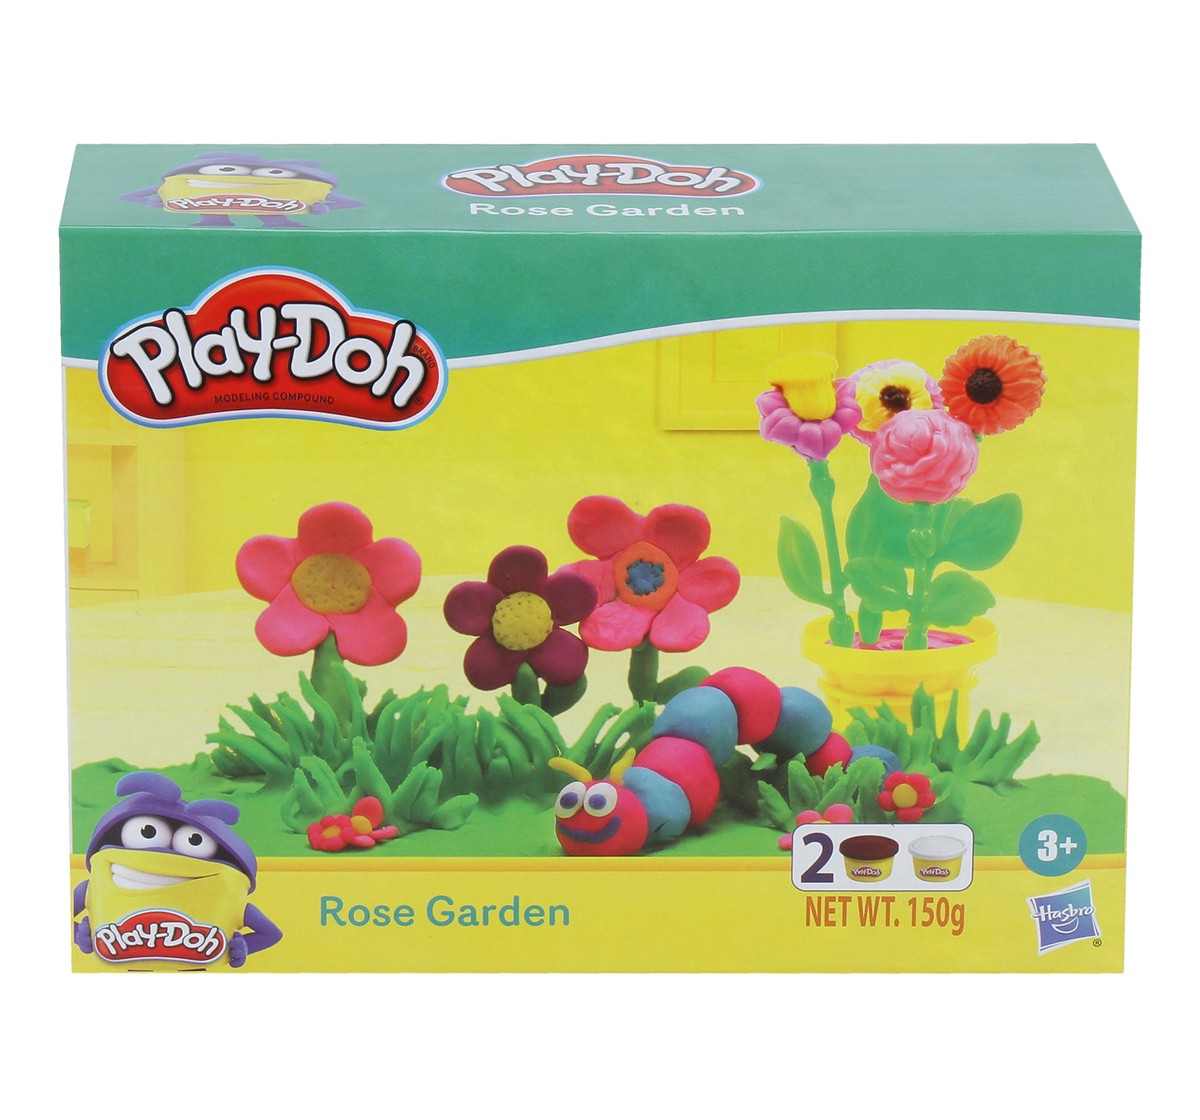 Play-Doh Rose Garden Playset for Kids 3 Years and Up with 2 Non-Toxic Play-Doh Colors Clay & Dough for Kids age 3Y+ 